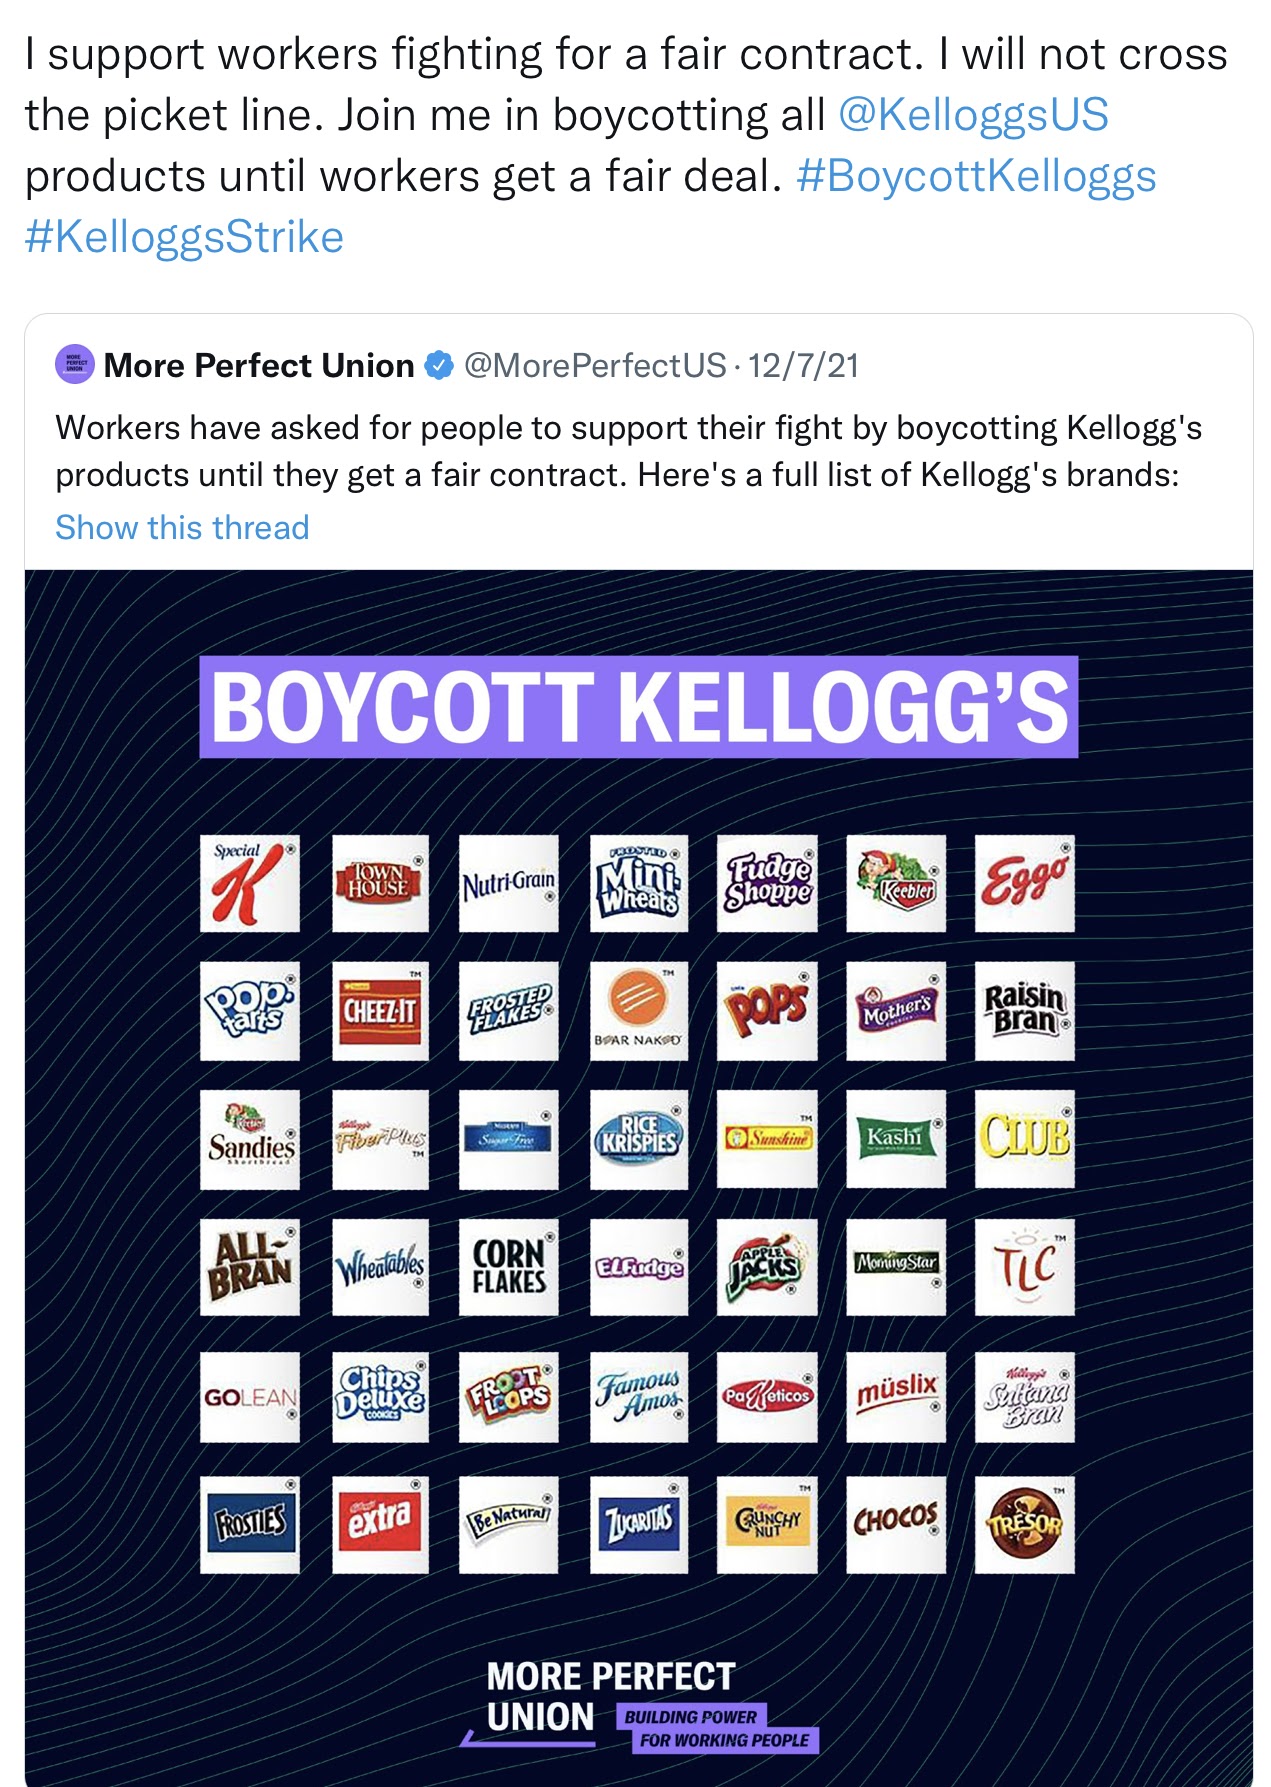 Tweet text is: I support workers fighting for a fair contract. I will not cross the picket line. Join me in boycotting all @kelloggsUS products until workers get a fair deal. #BoycottKelloggs #KellooggsStrike